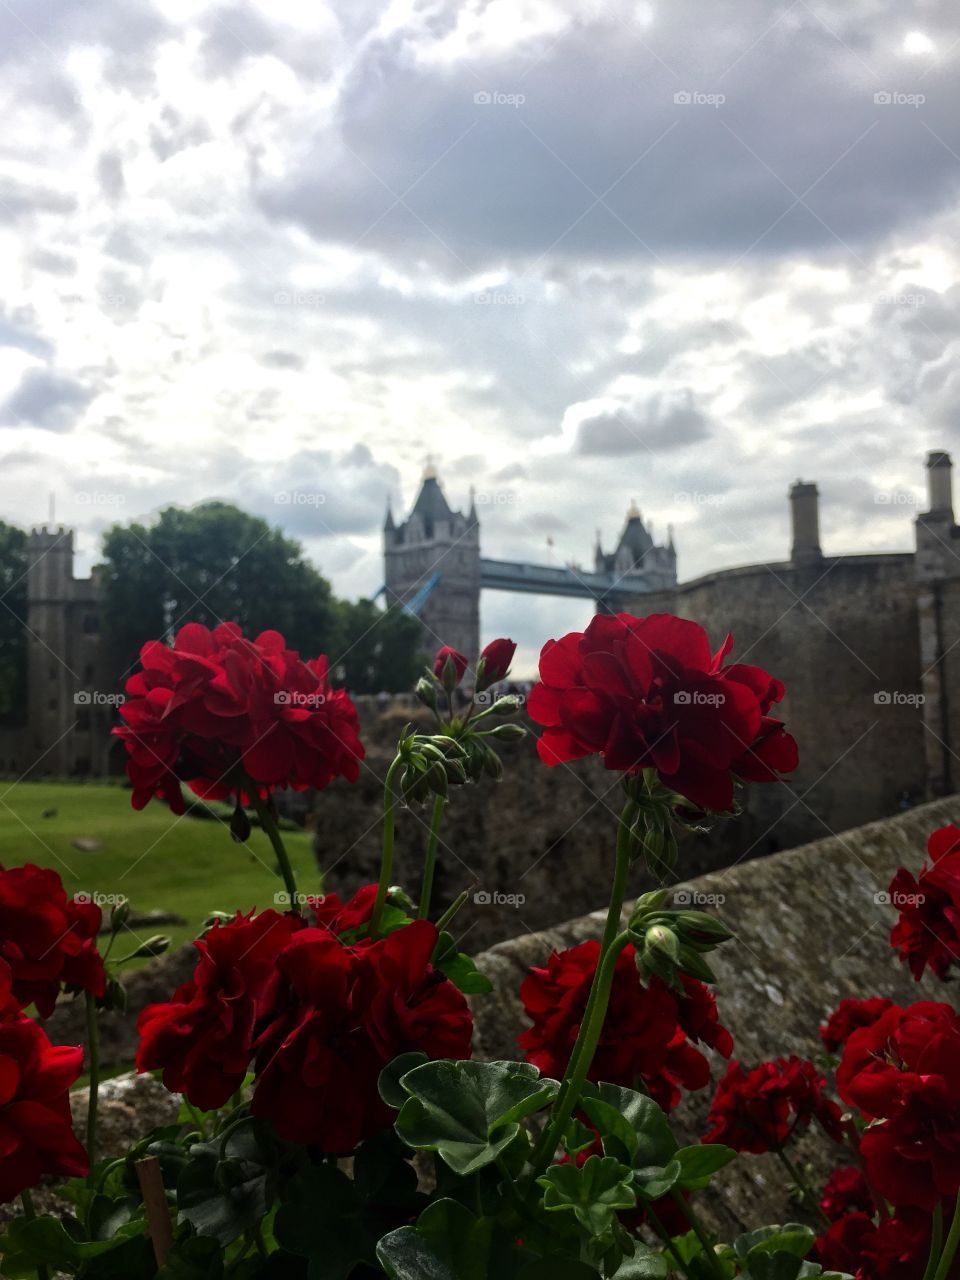 I loved capturing the views within the Tower of London. Not only of the beauty within, but the beauty that laid just outside of the gate. 